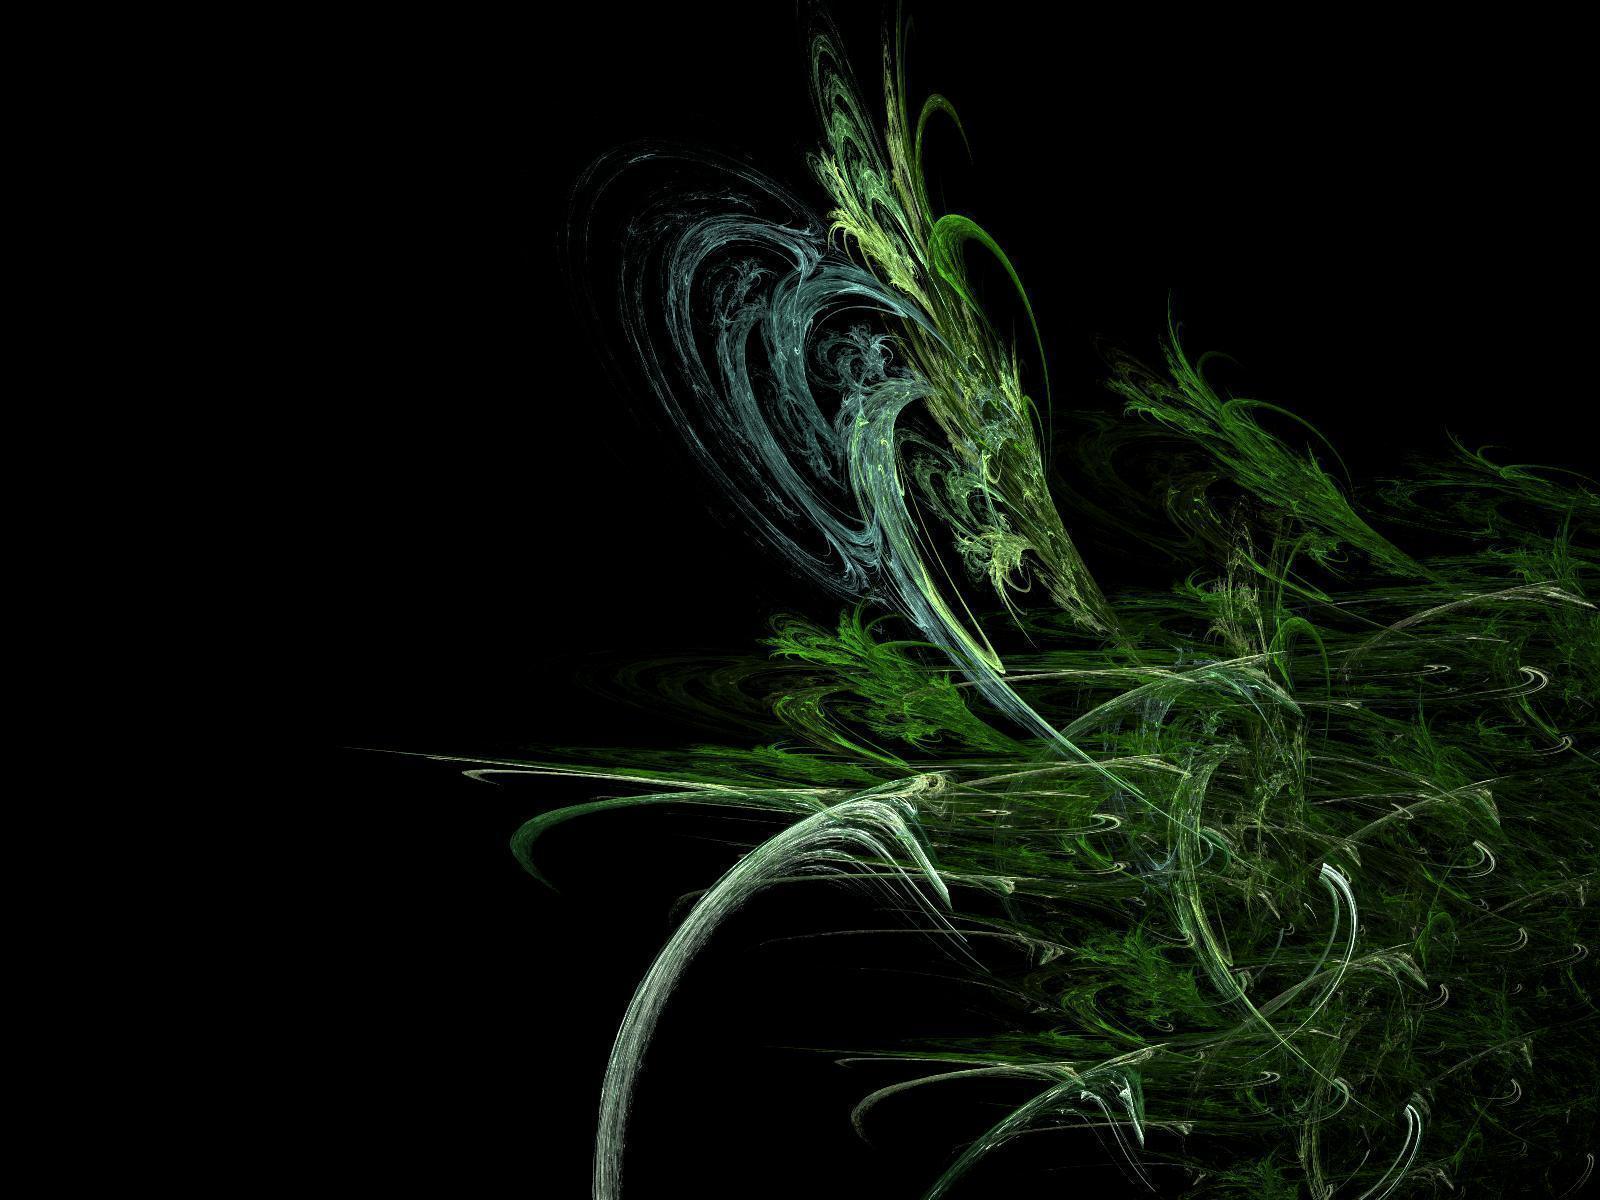 black backgrounds free hd download : Black And Green Backgrounds